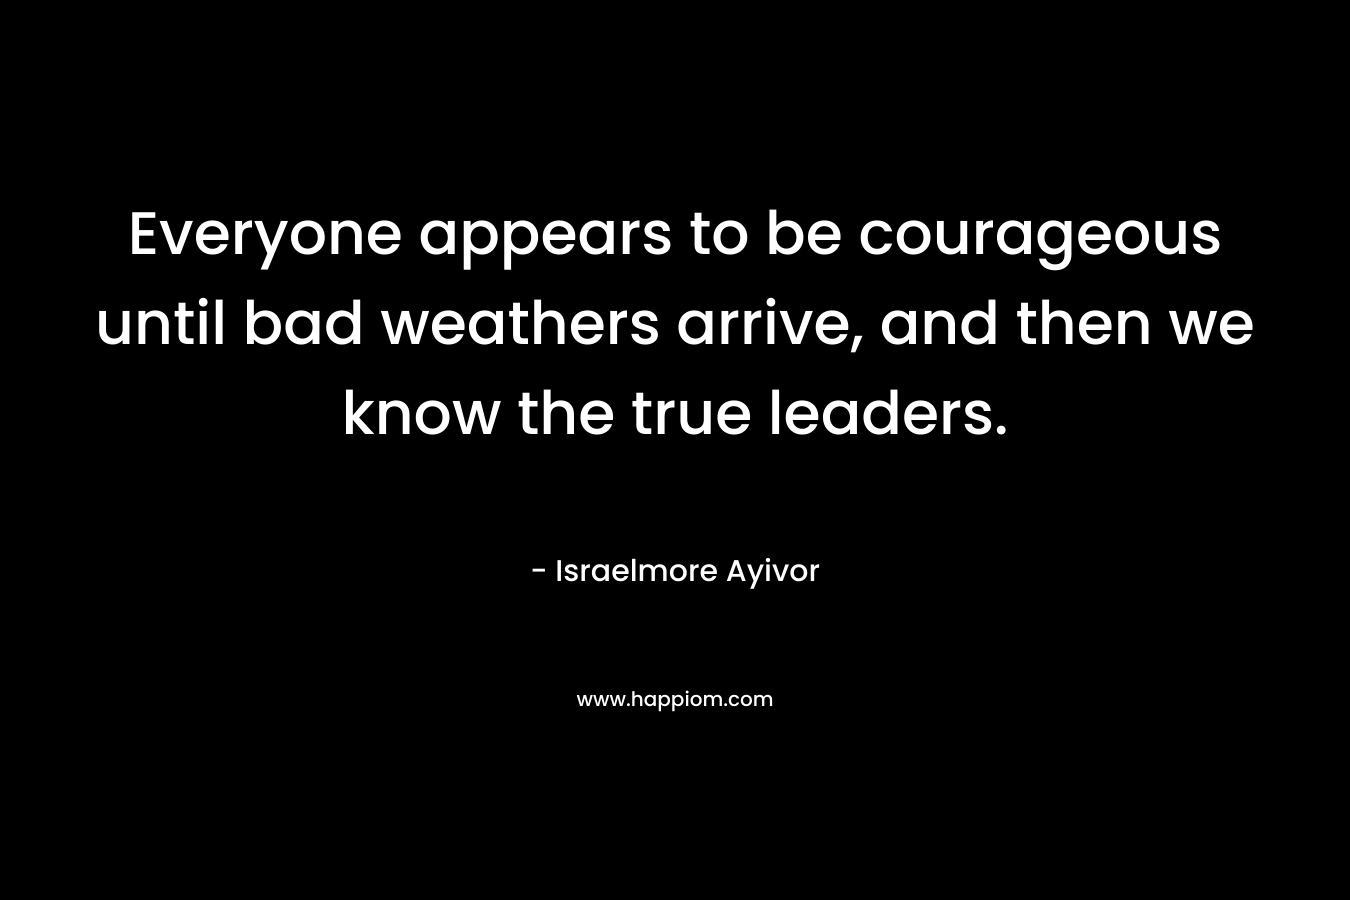 Everyone appears to be courageous until bad weathers arrive, and then we know the true leaders. – Israelmore Ayivor